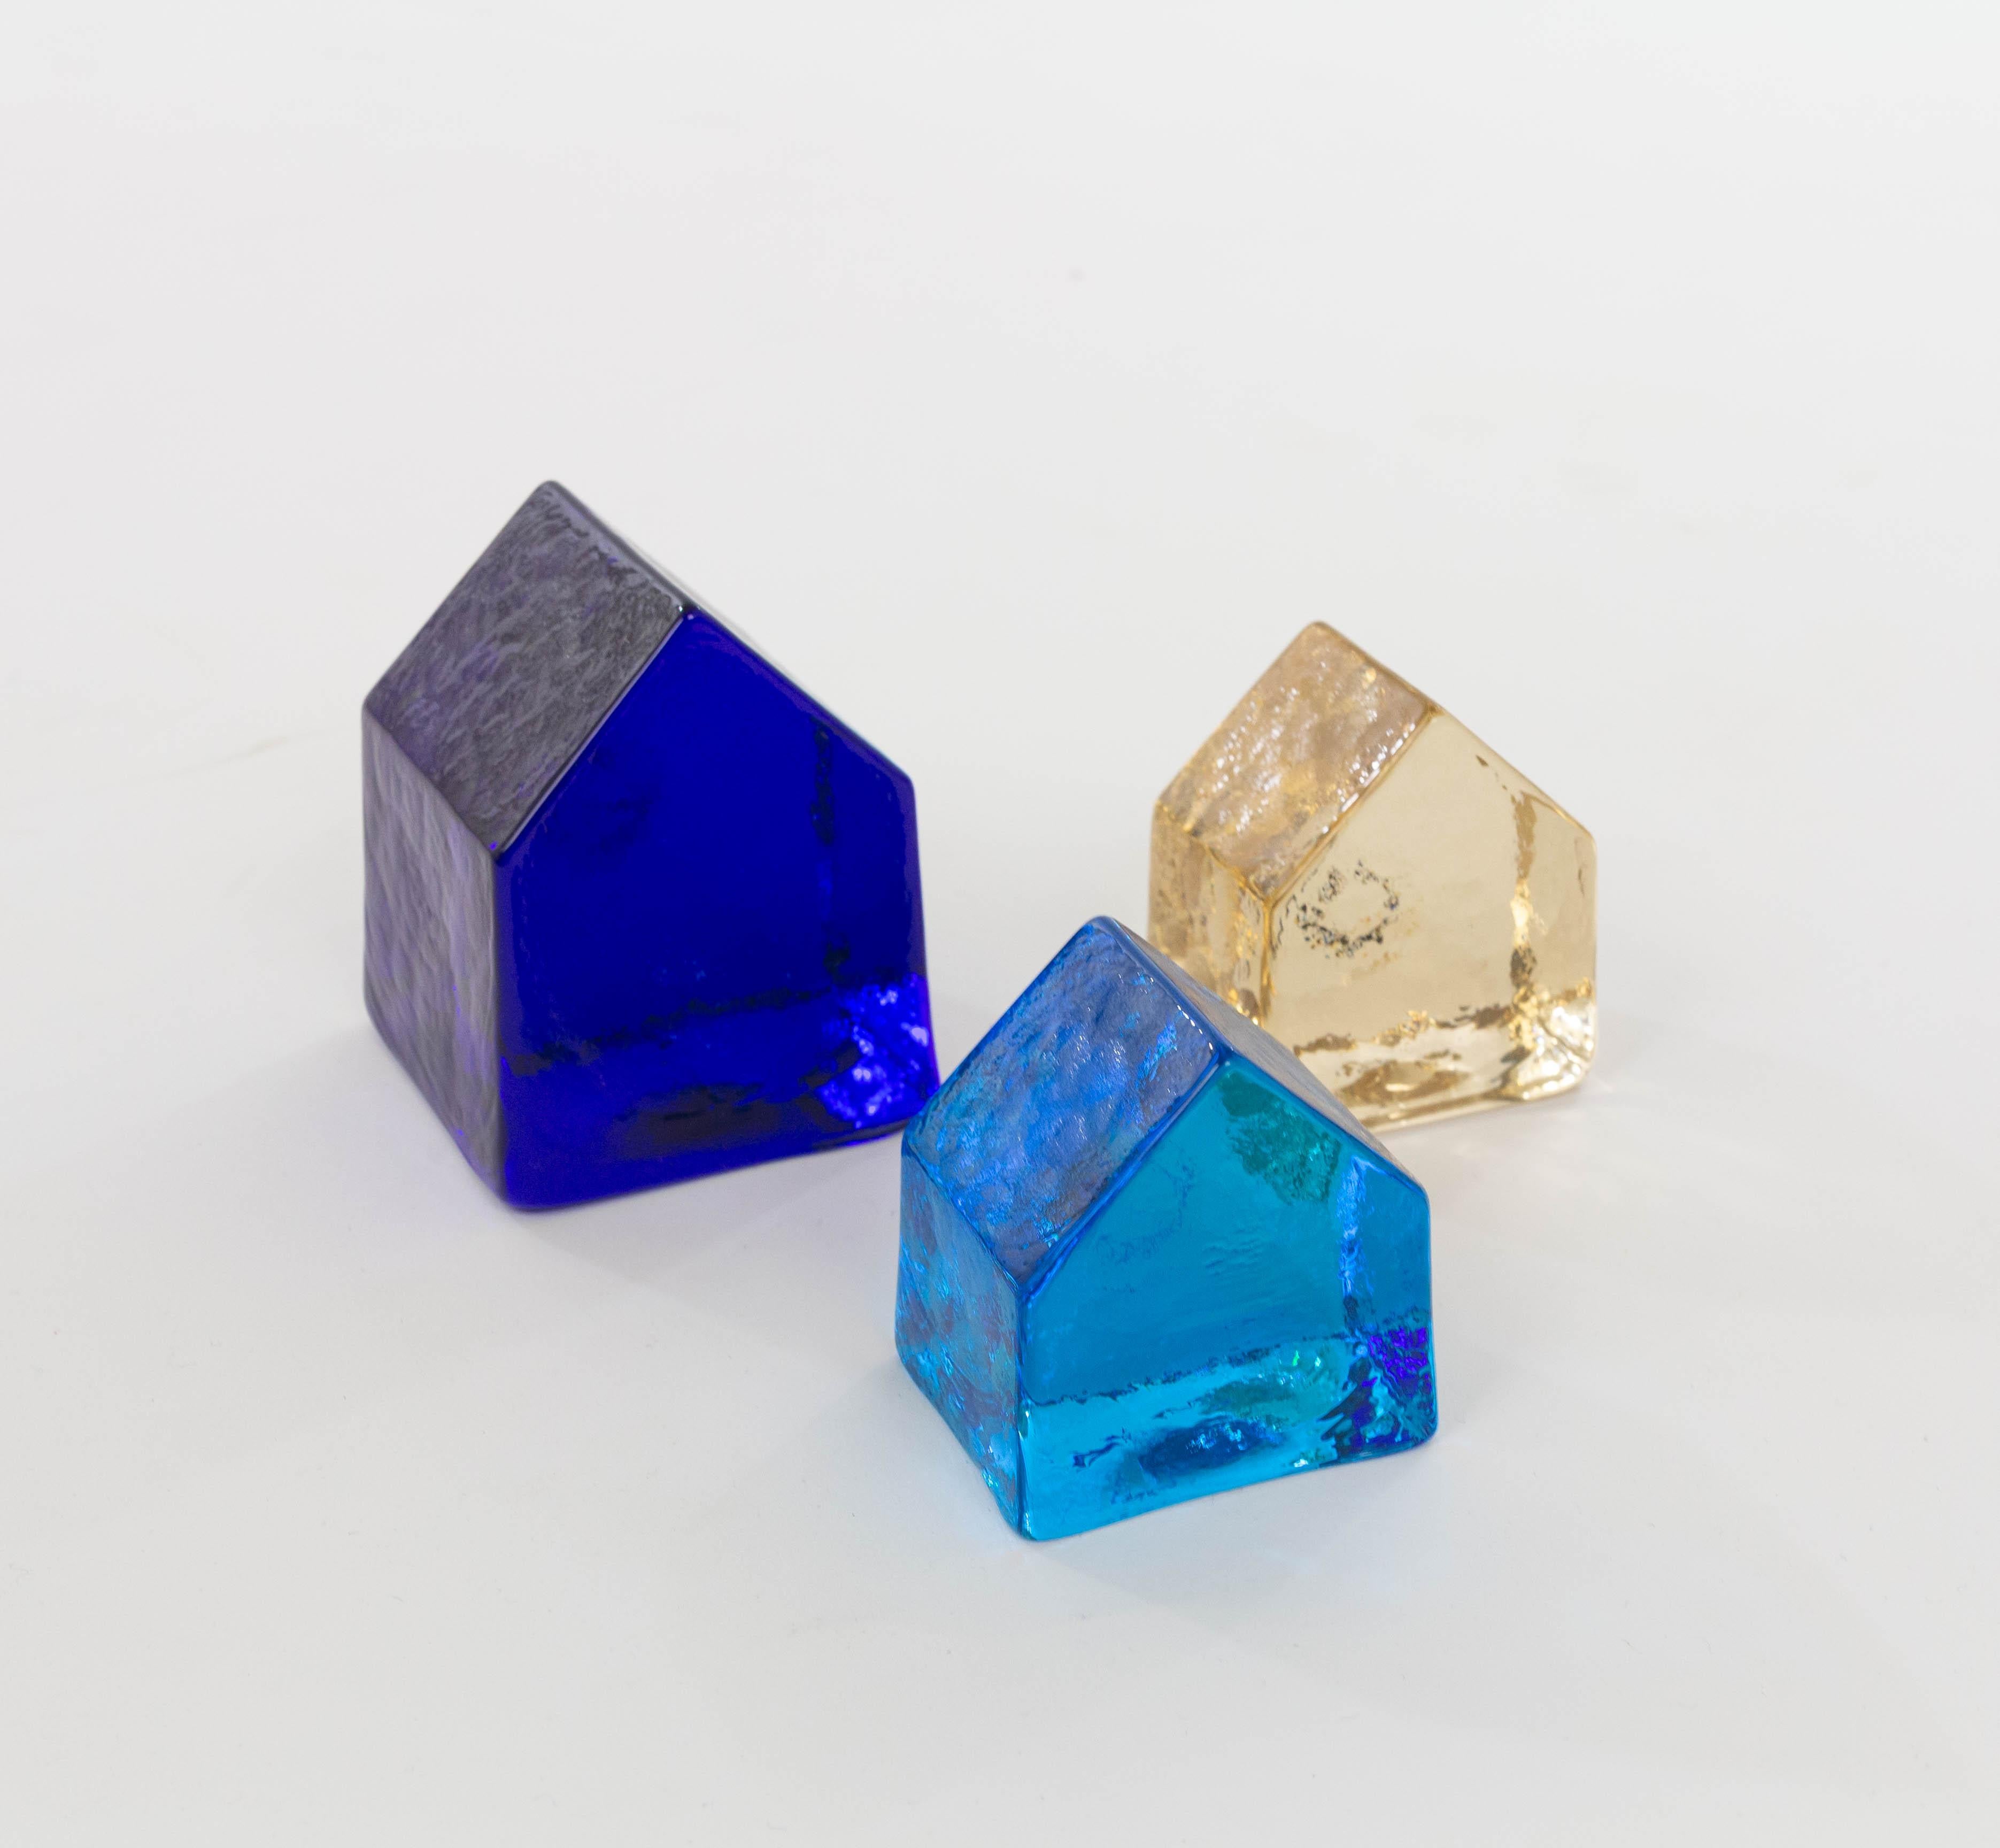 Carlo Nason designed these objects in the 1970s for V.Nason&Co, the company of his father Vincenzo Nason.

They are made of Murano glass in three striking colours. The items could be used as decorative objects or as paperweights.

This set consists